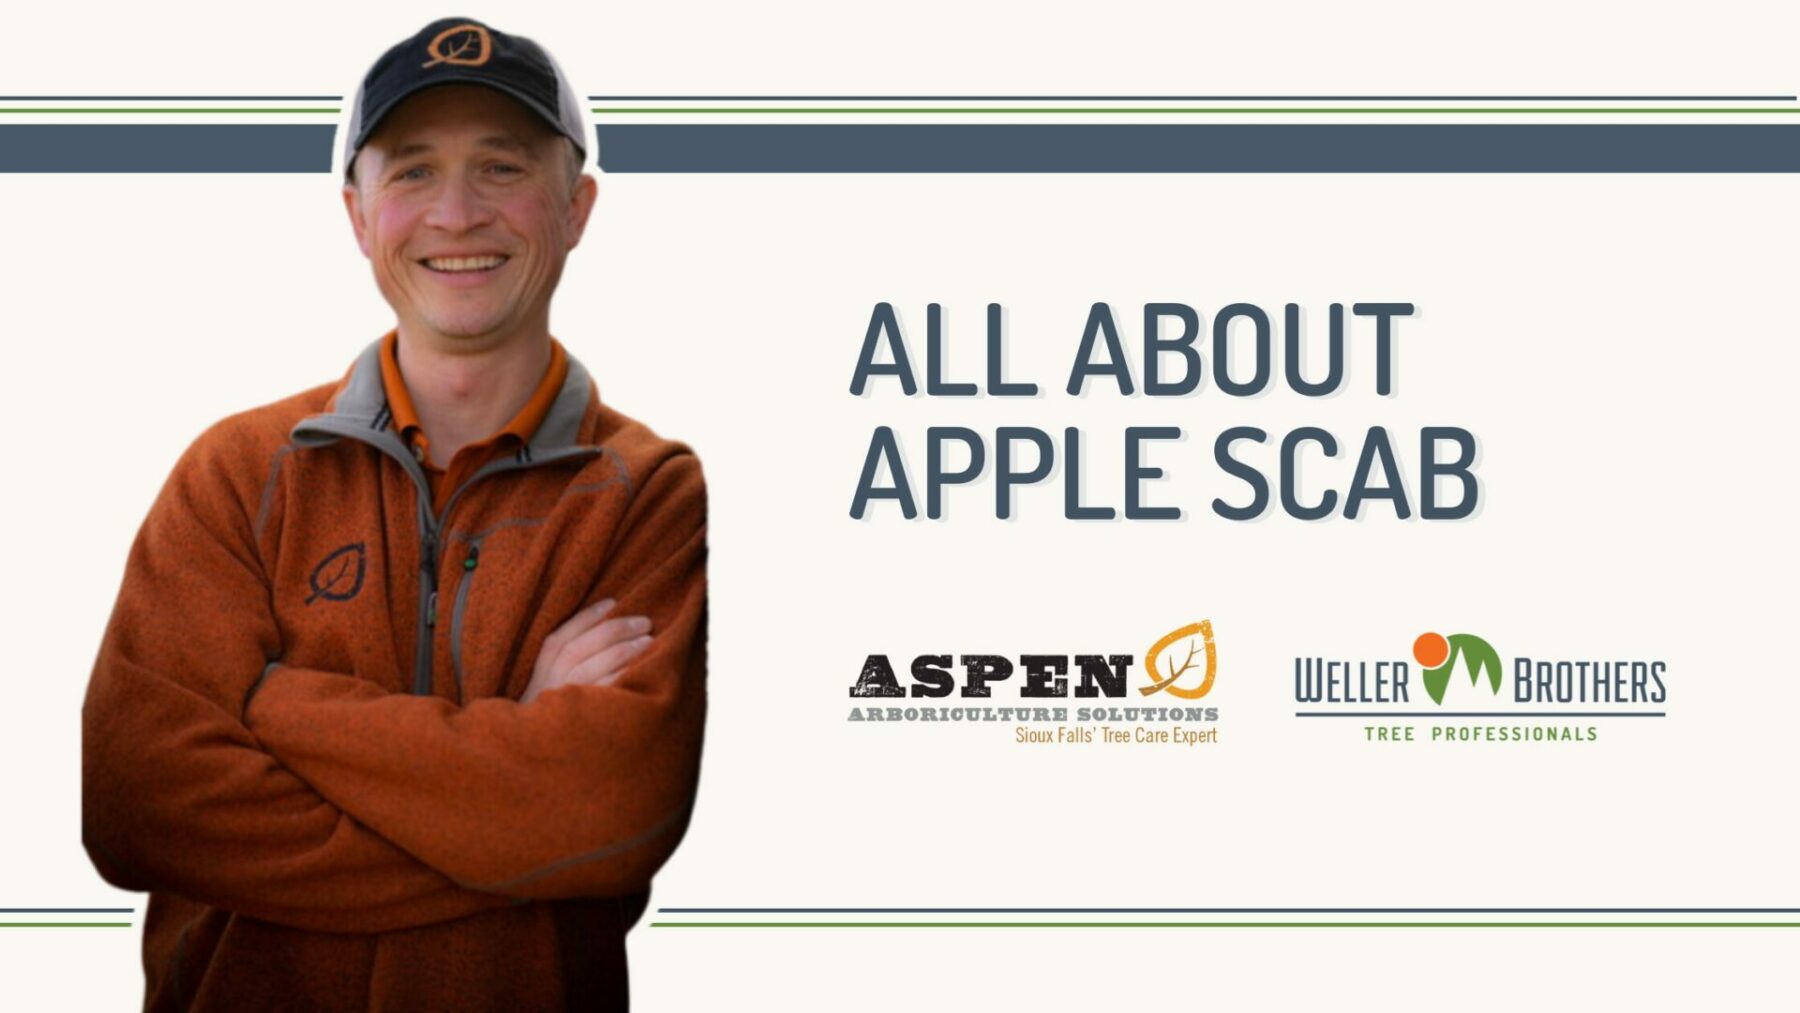 All About Apple Scab on Tree Talk with Sam Kezar Board Certified Mater Arborist